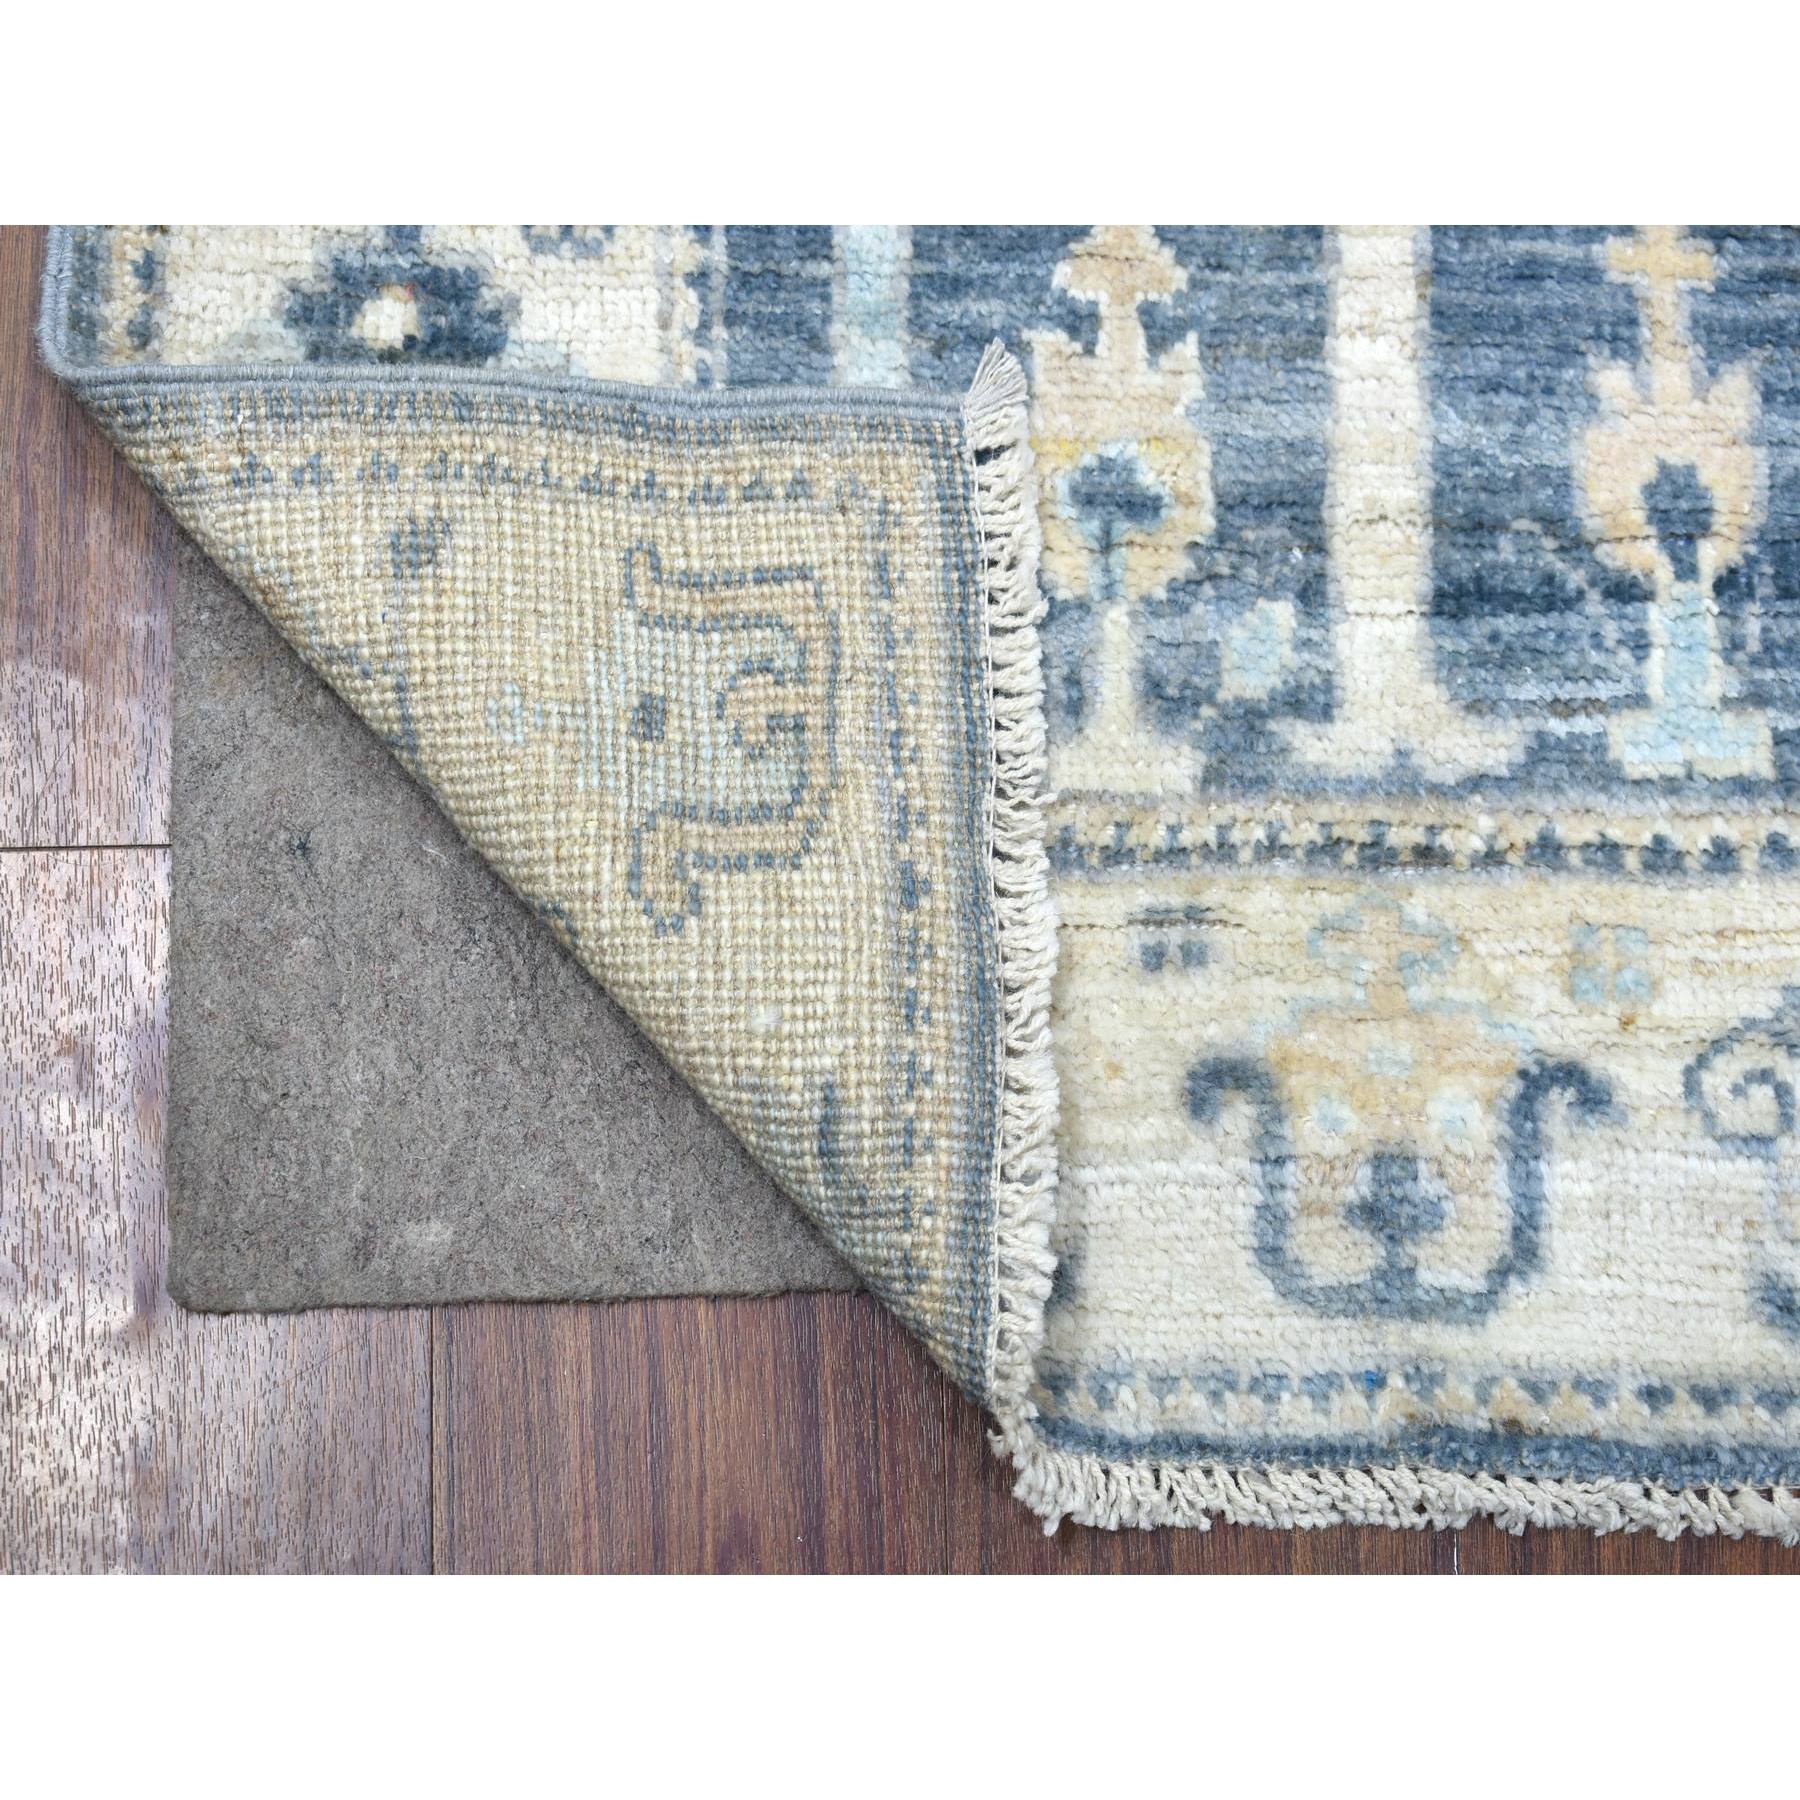 2'7"x9'8" Navy Blue Angora Oushak with Faded Cypress and Willow Tree Design Natural Wool Hand Woven Oriental Runner Rug 